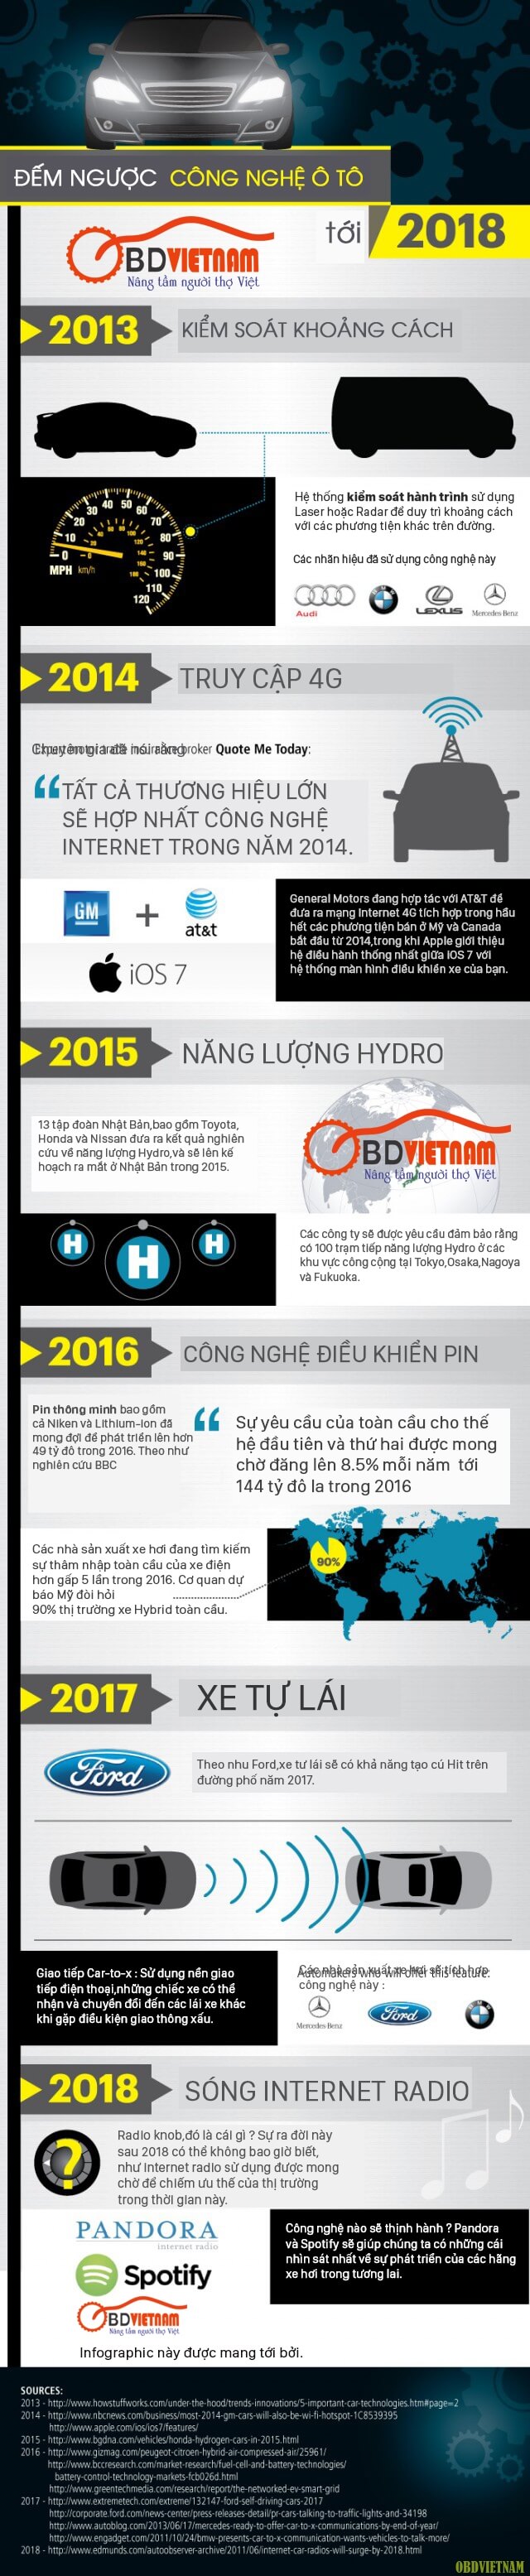 infographic-dem-nguoc-cong-nghe-o-to-toi-nam-2018